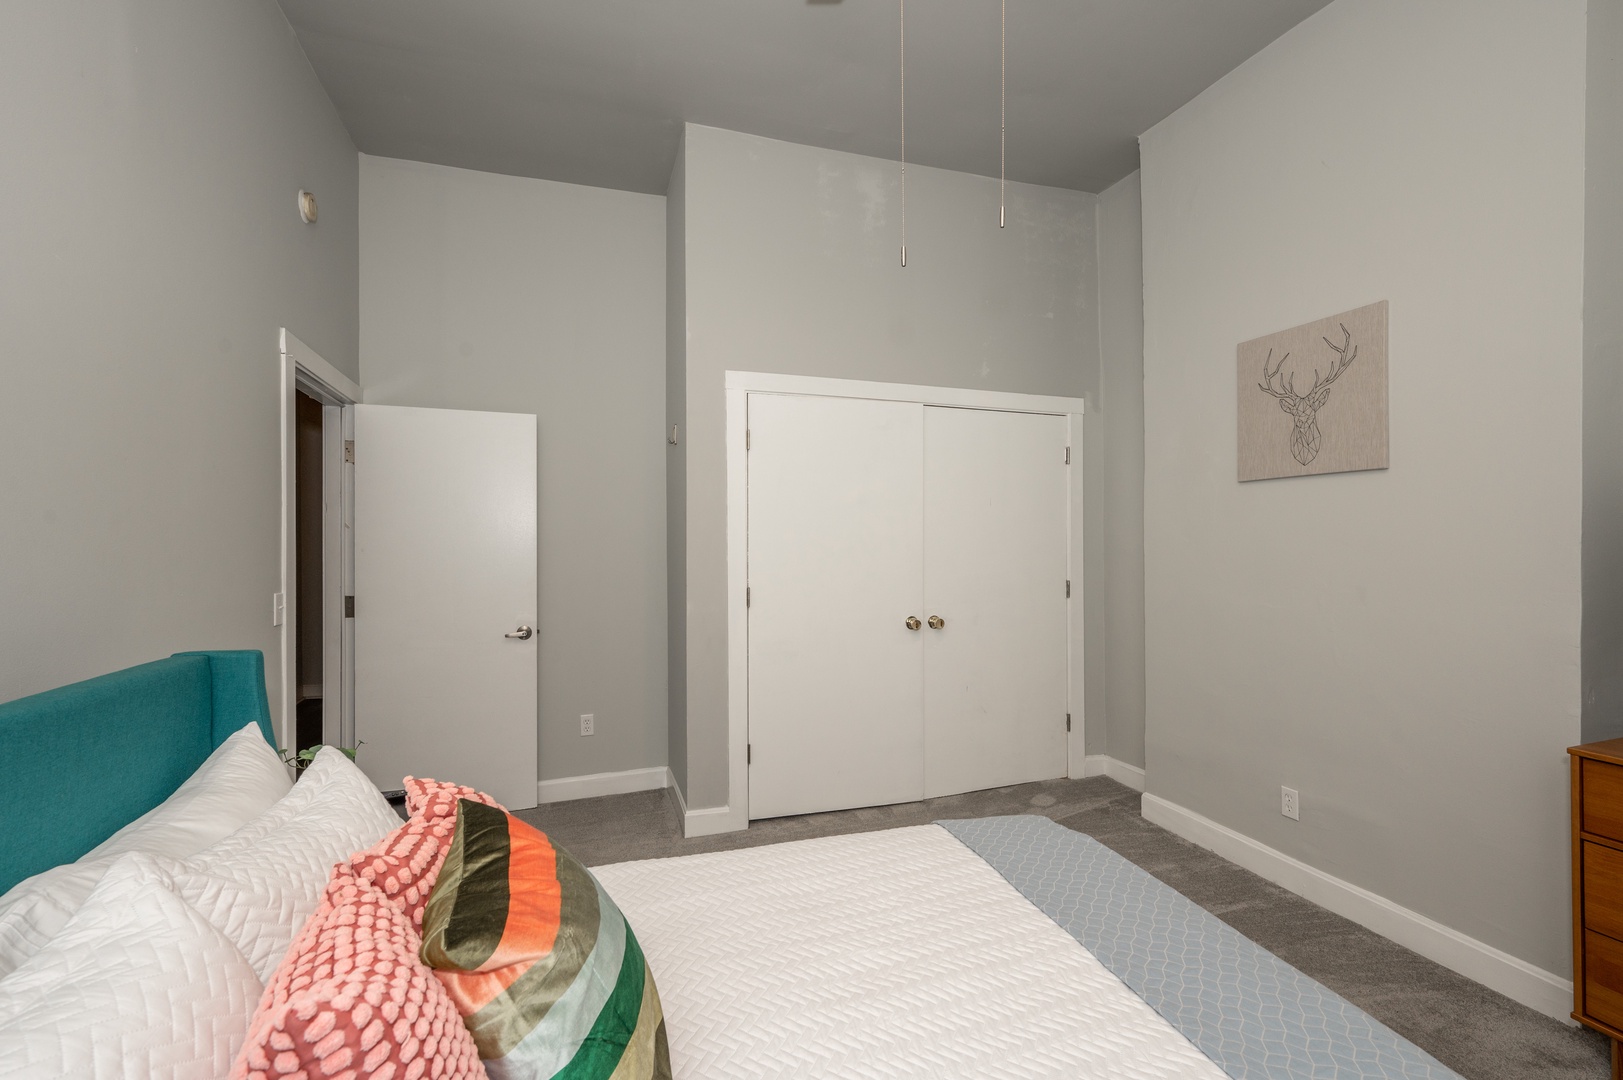 Queen Bedroom with Smart TV, Ceiling Fan, and ample closet space